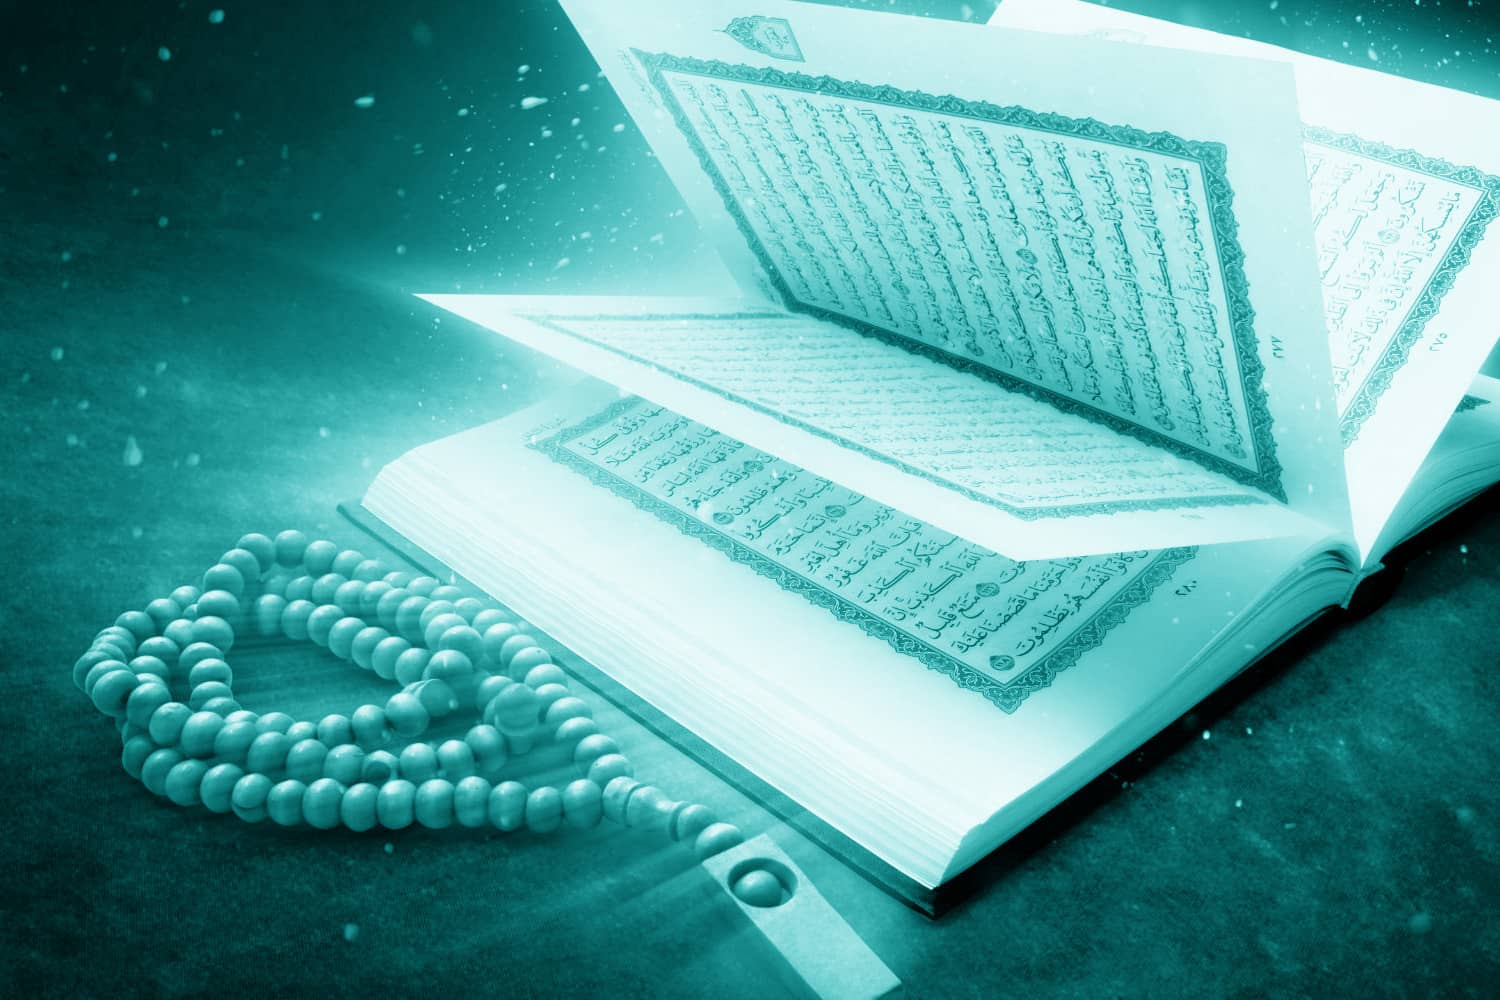 Quran Recitation Course - Online Learning